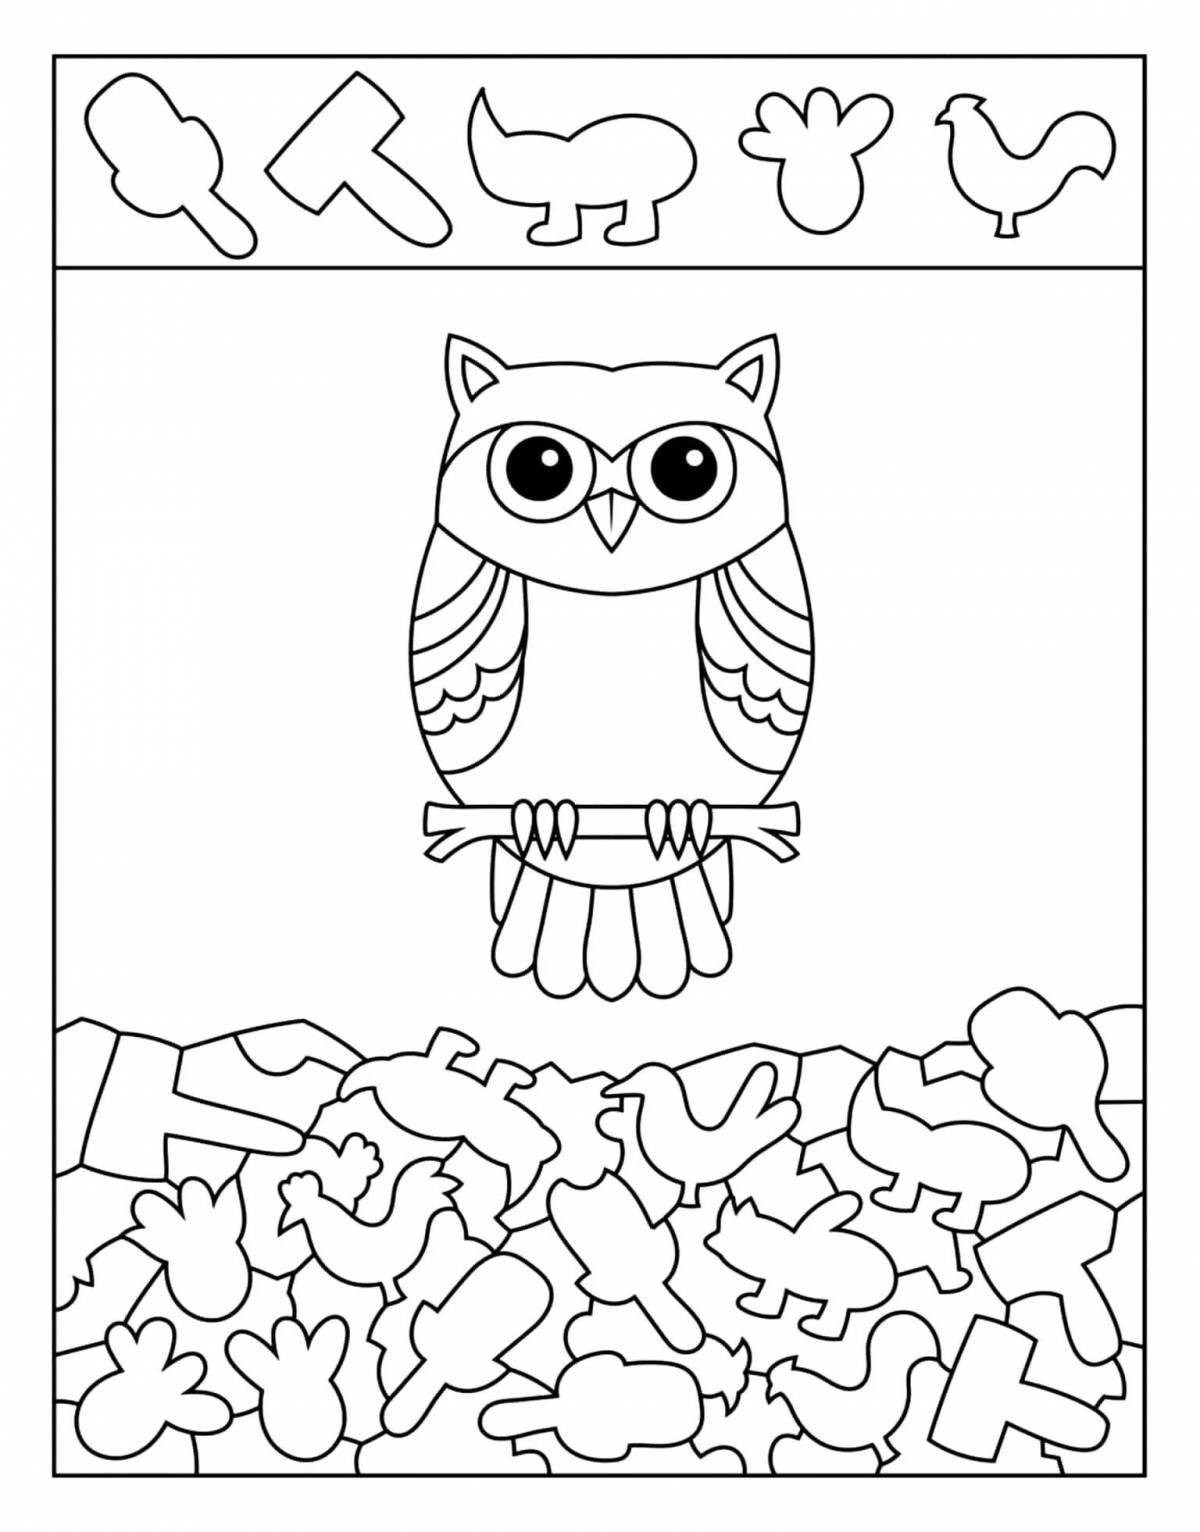 Crazy coloring pages for 5 year olds